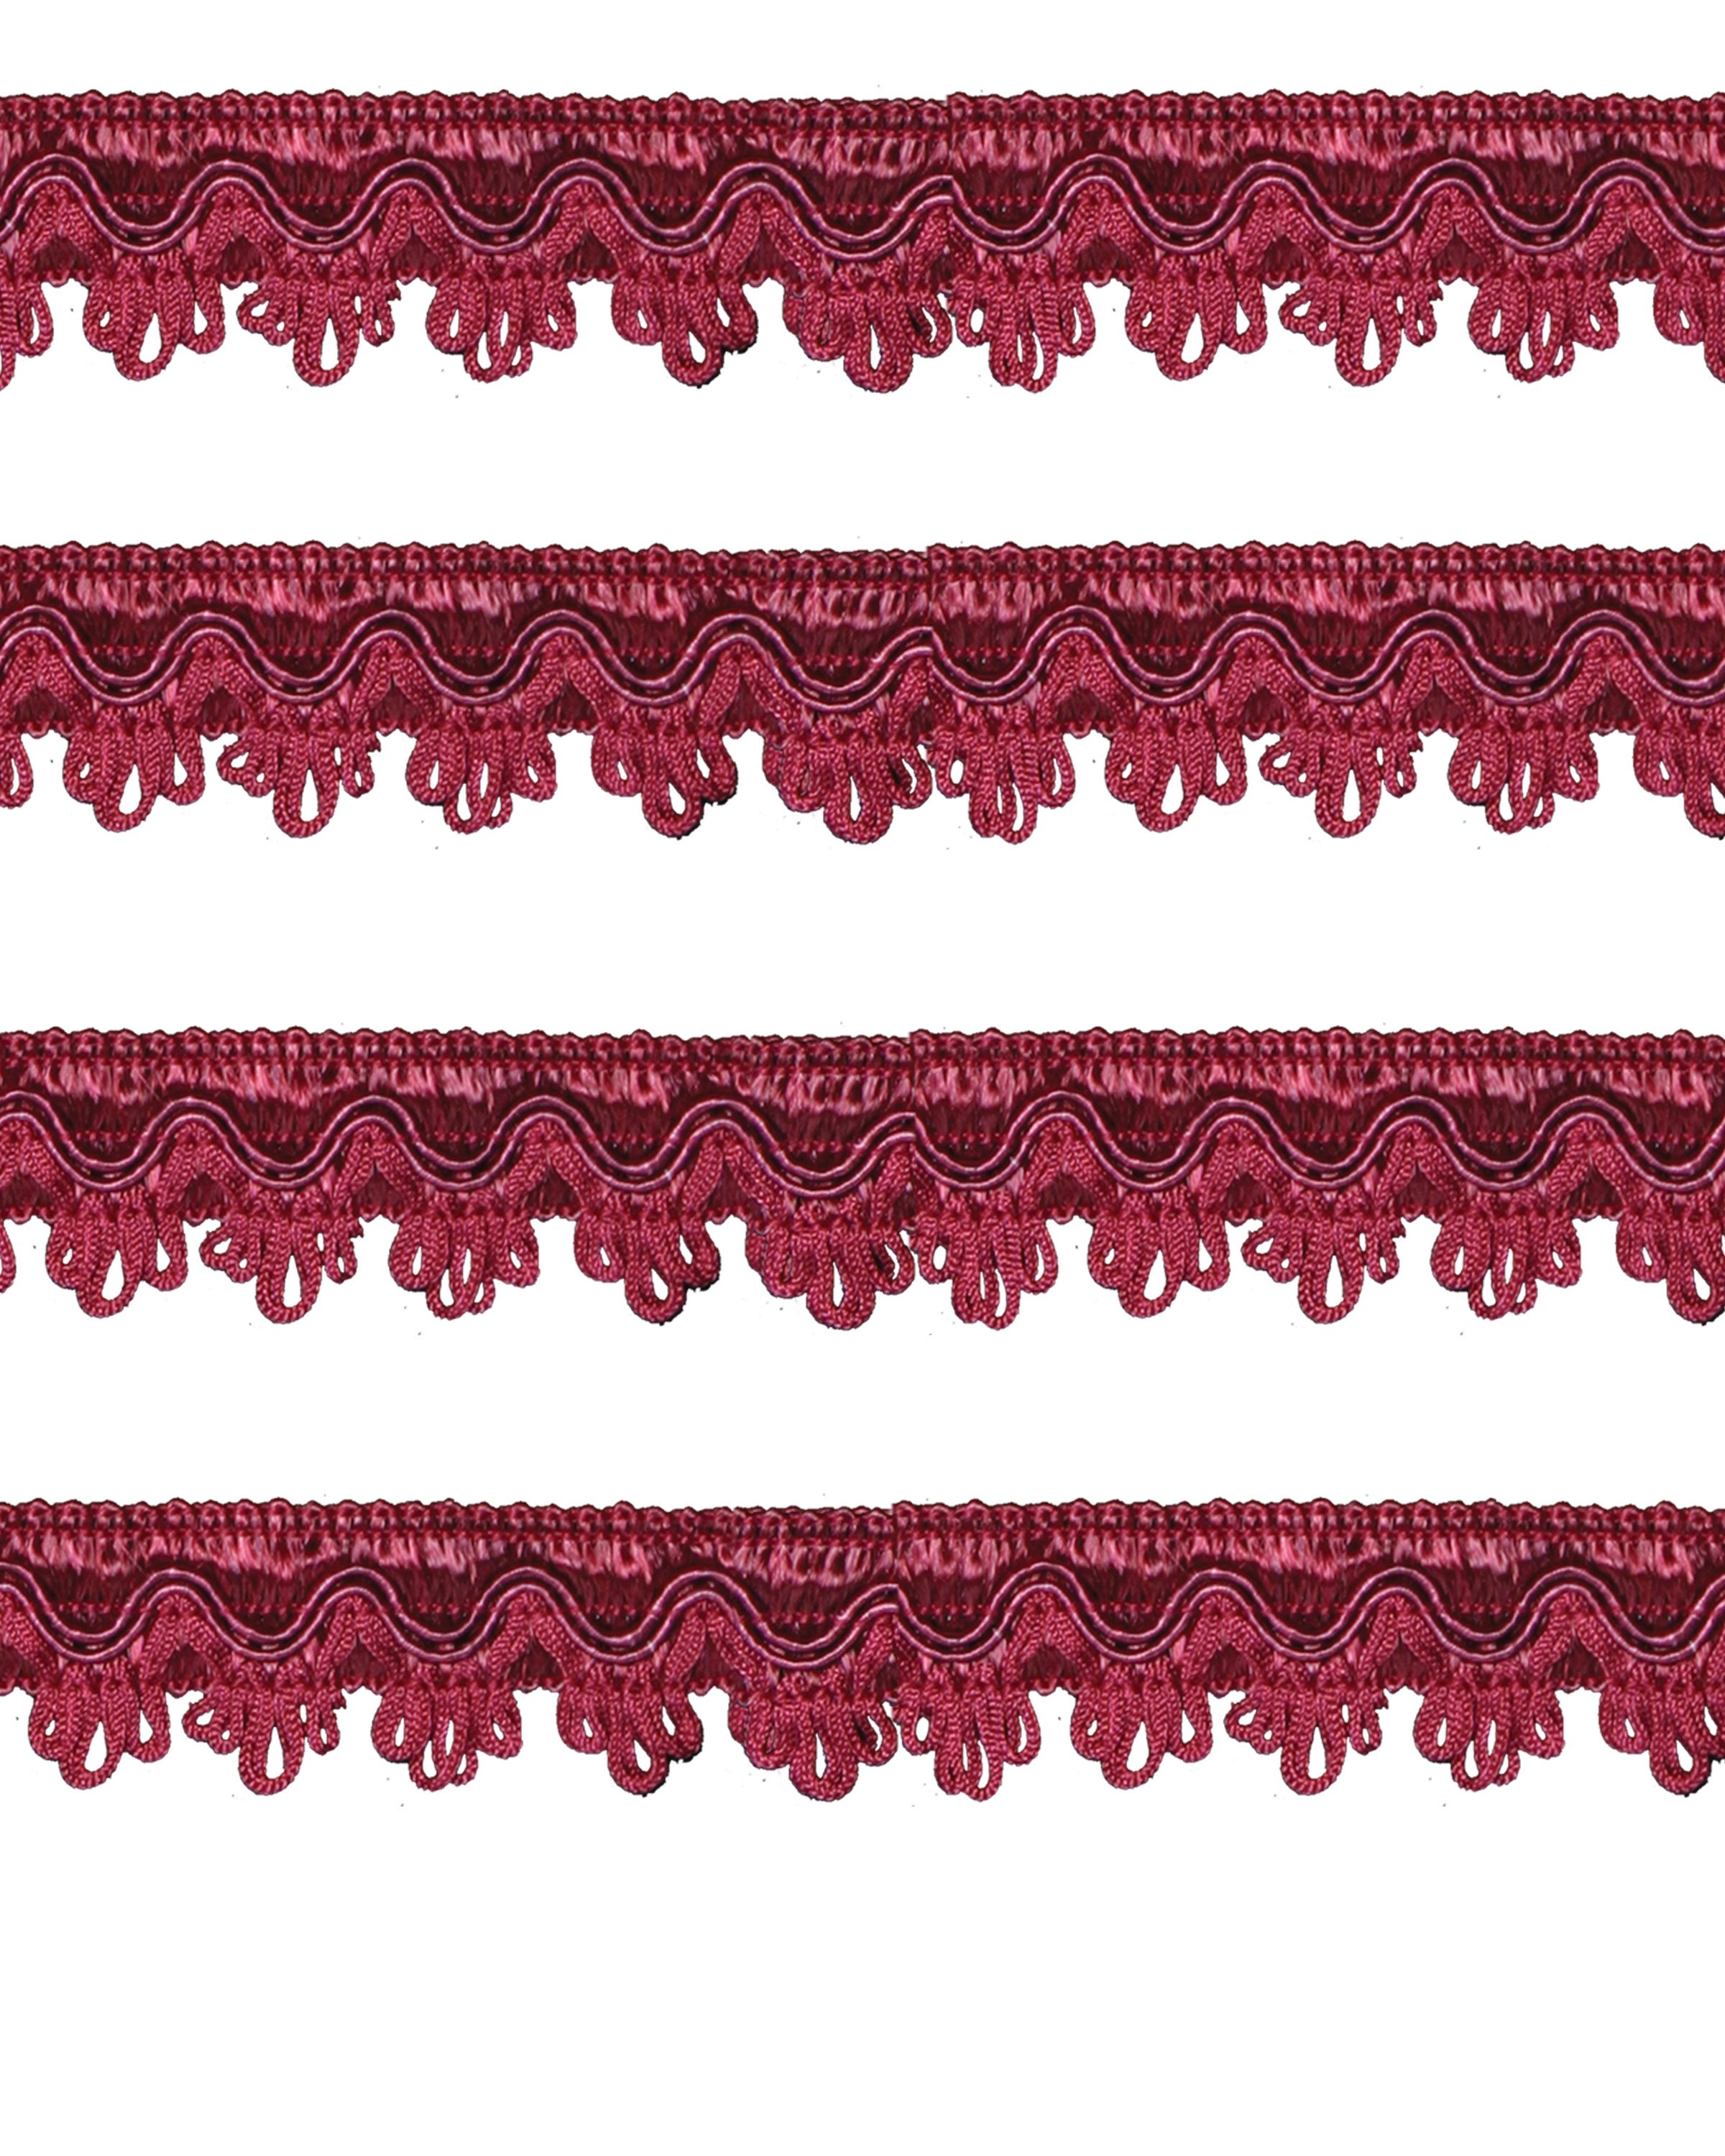 Fancy Braid - Red Wine 27mm Price is for 5 metres